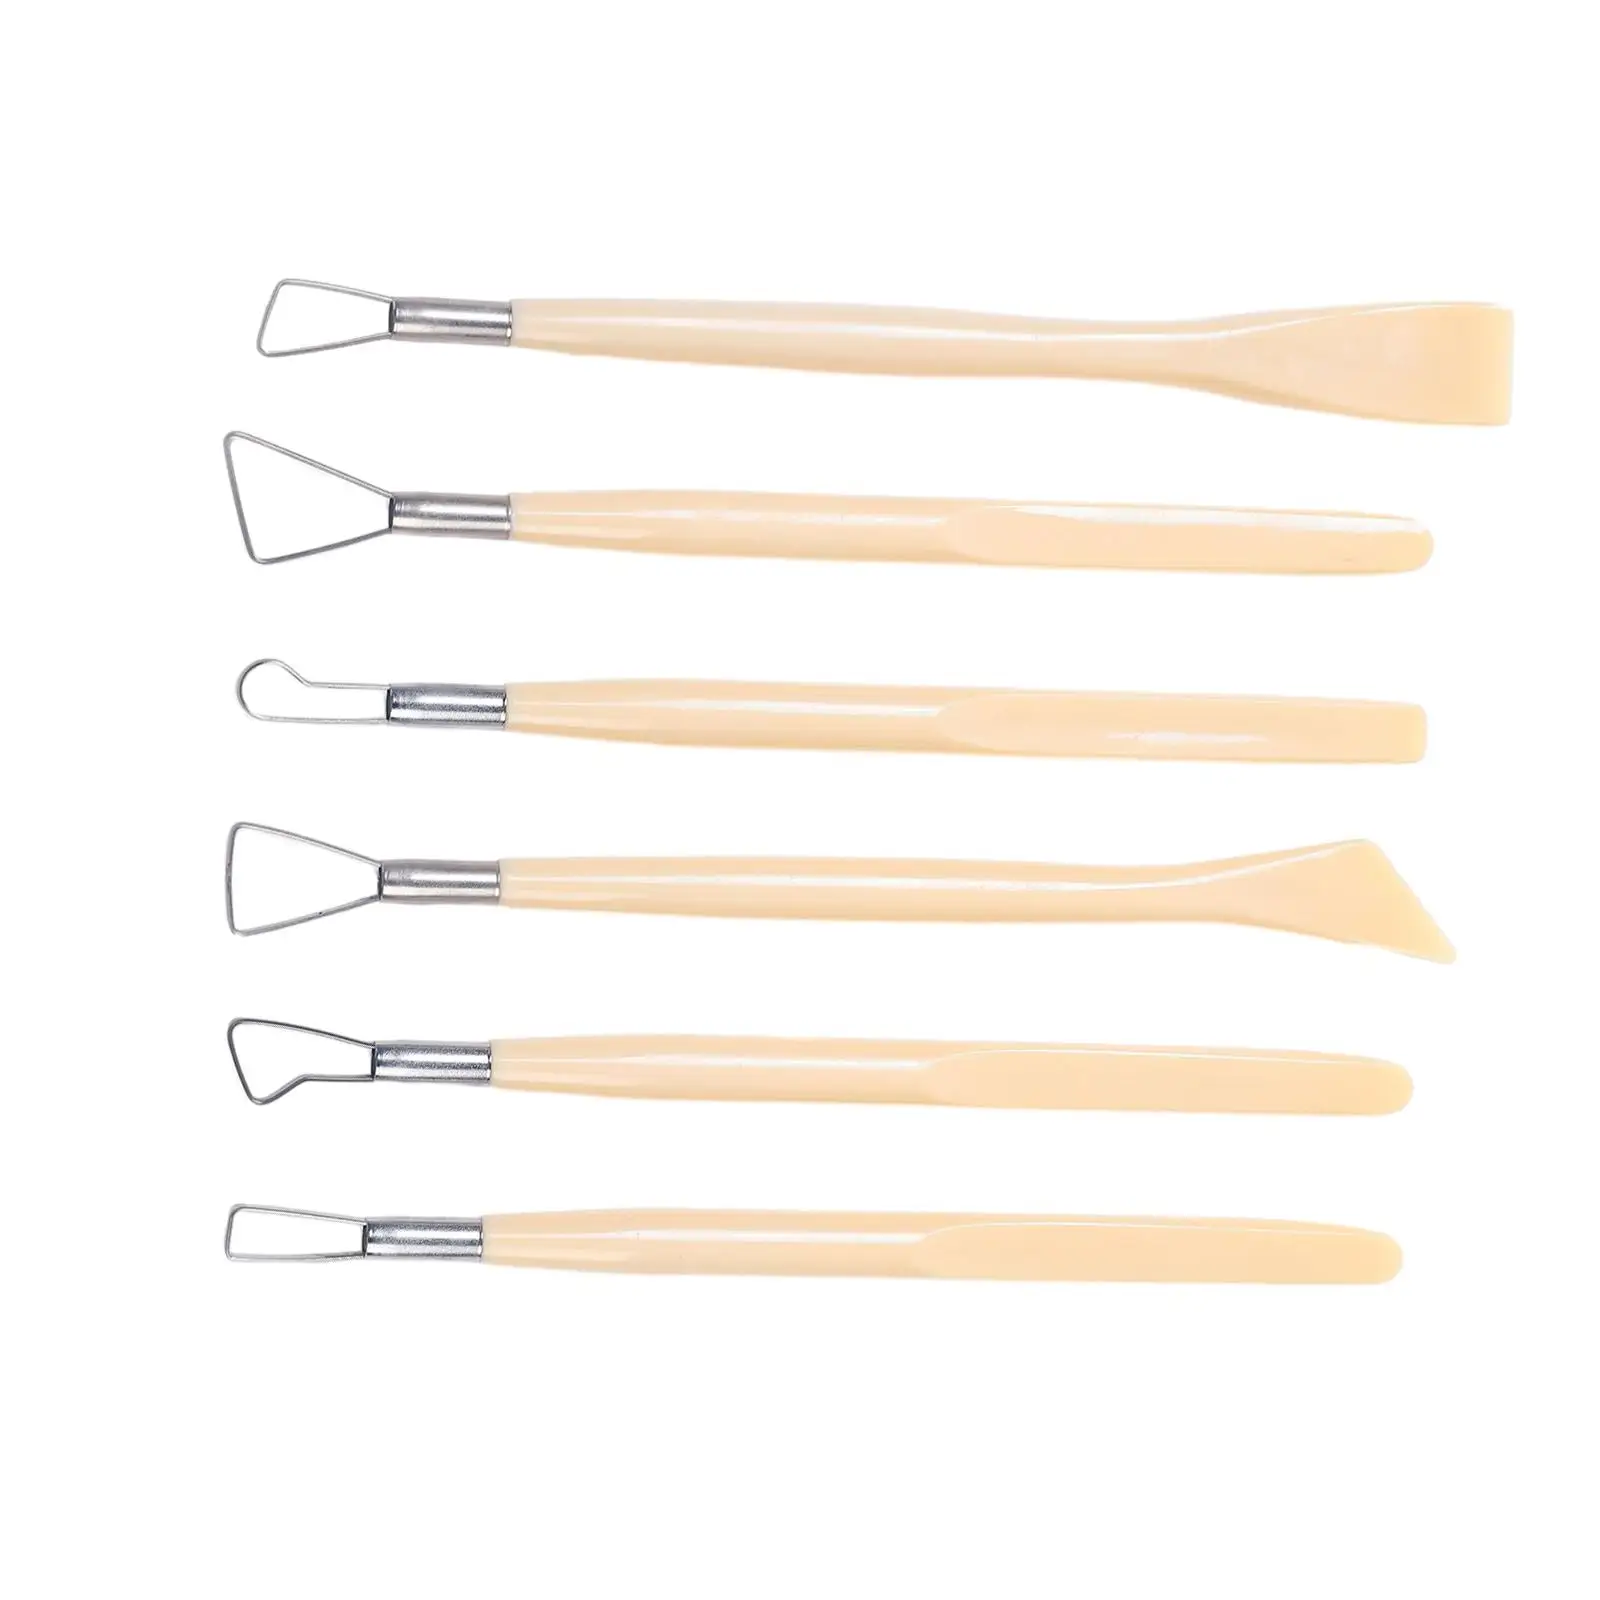 6 Pieces Ceramic Pottery Clay Tools Double Head Durable Accessory Multifunctional with Different Tips for Detailing and Trimming